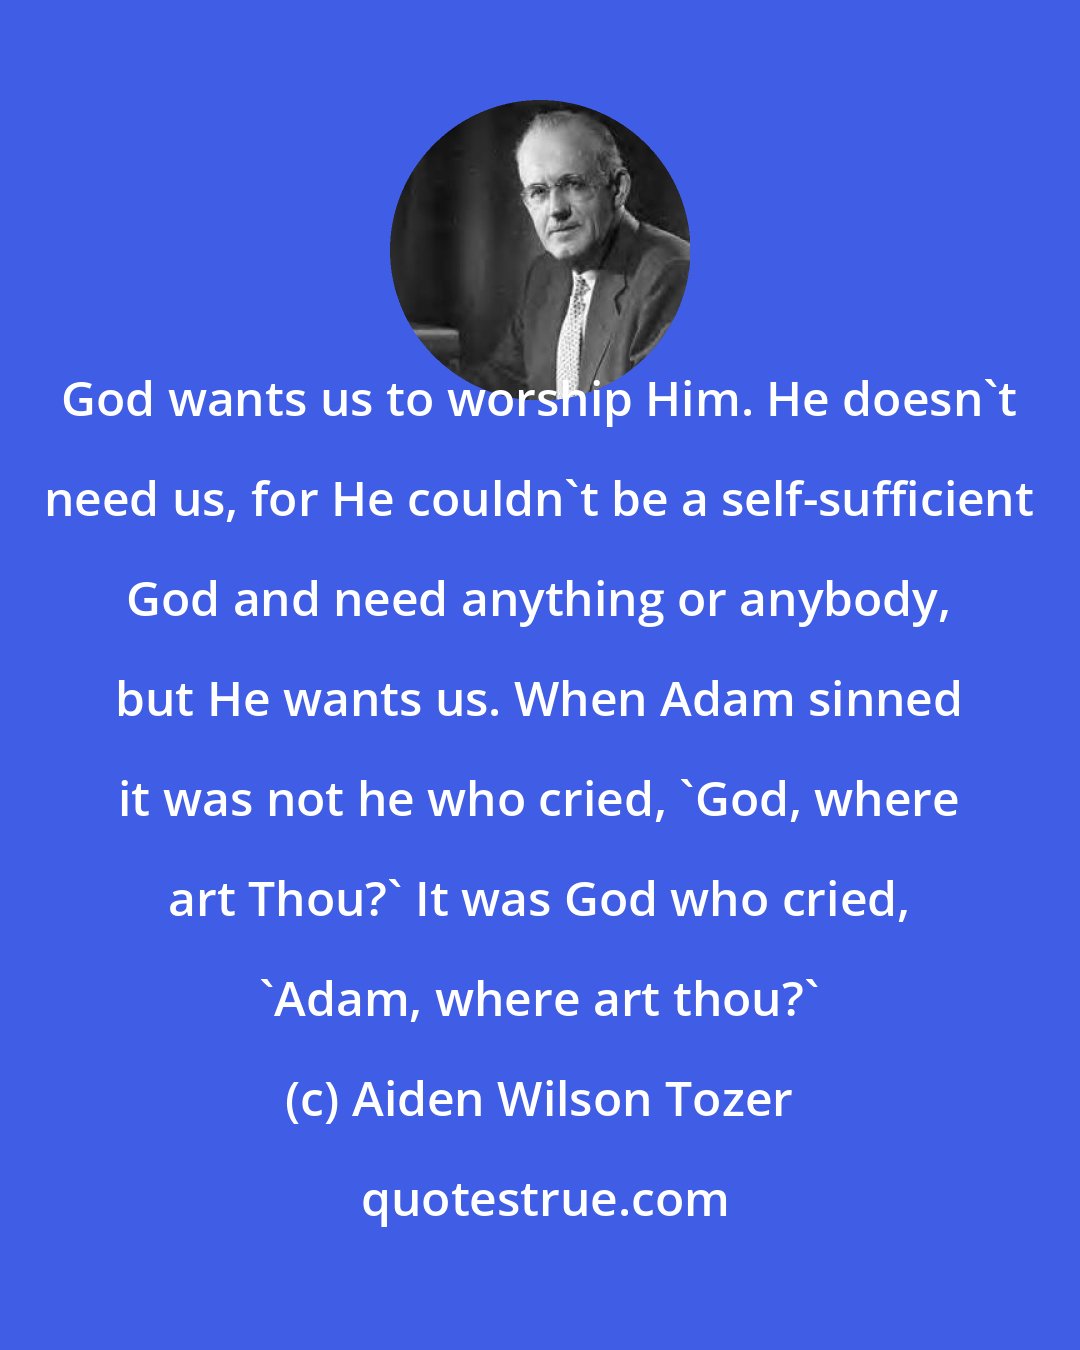 Aiden Wilson Tozer: God wants us to worship Him. He doesn't need us, for He couldn't be a self-sufficient God and need anything or anybody, but He wants us. When Adam sinned it was not he who cried, 'God, where art Thou?' It was God who cried, 'Adam, where art thou?'